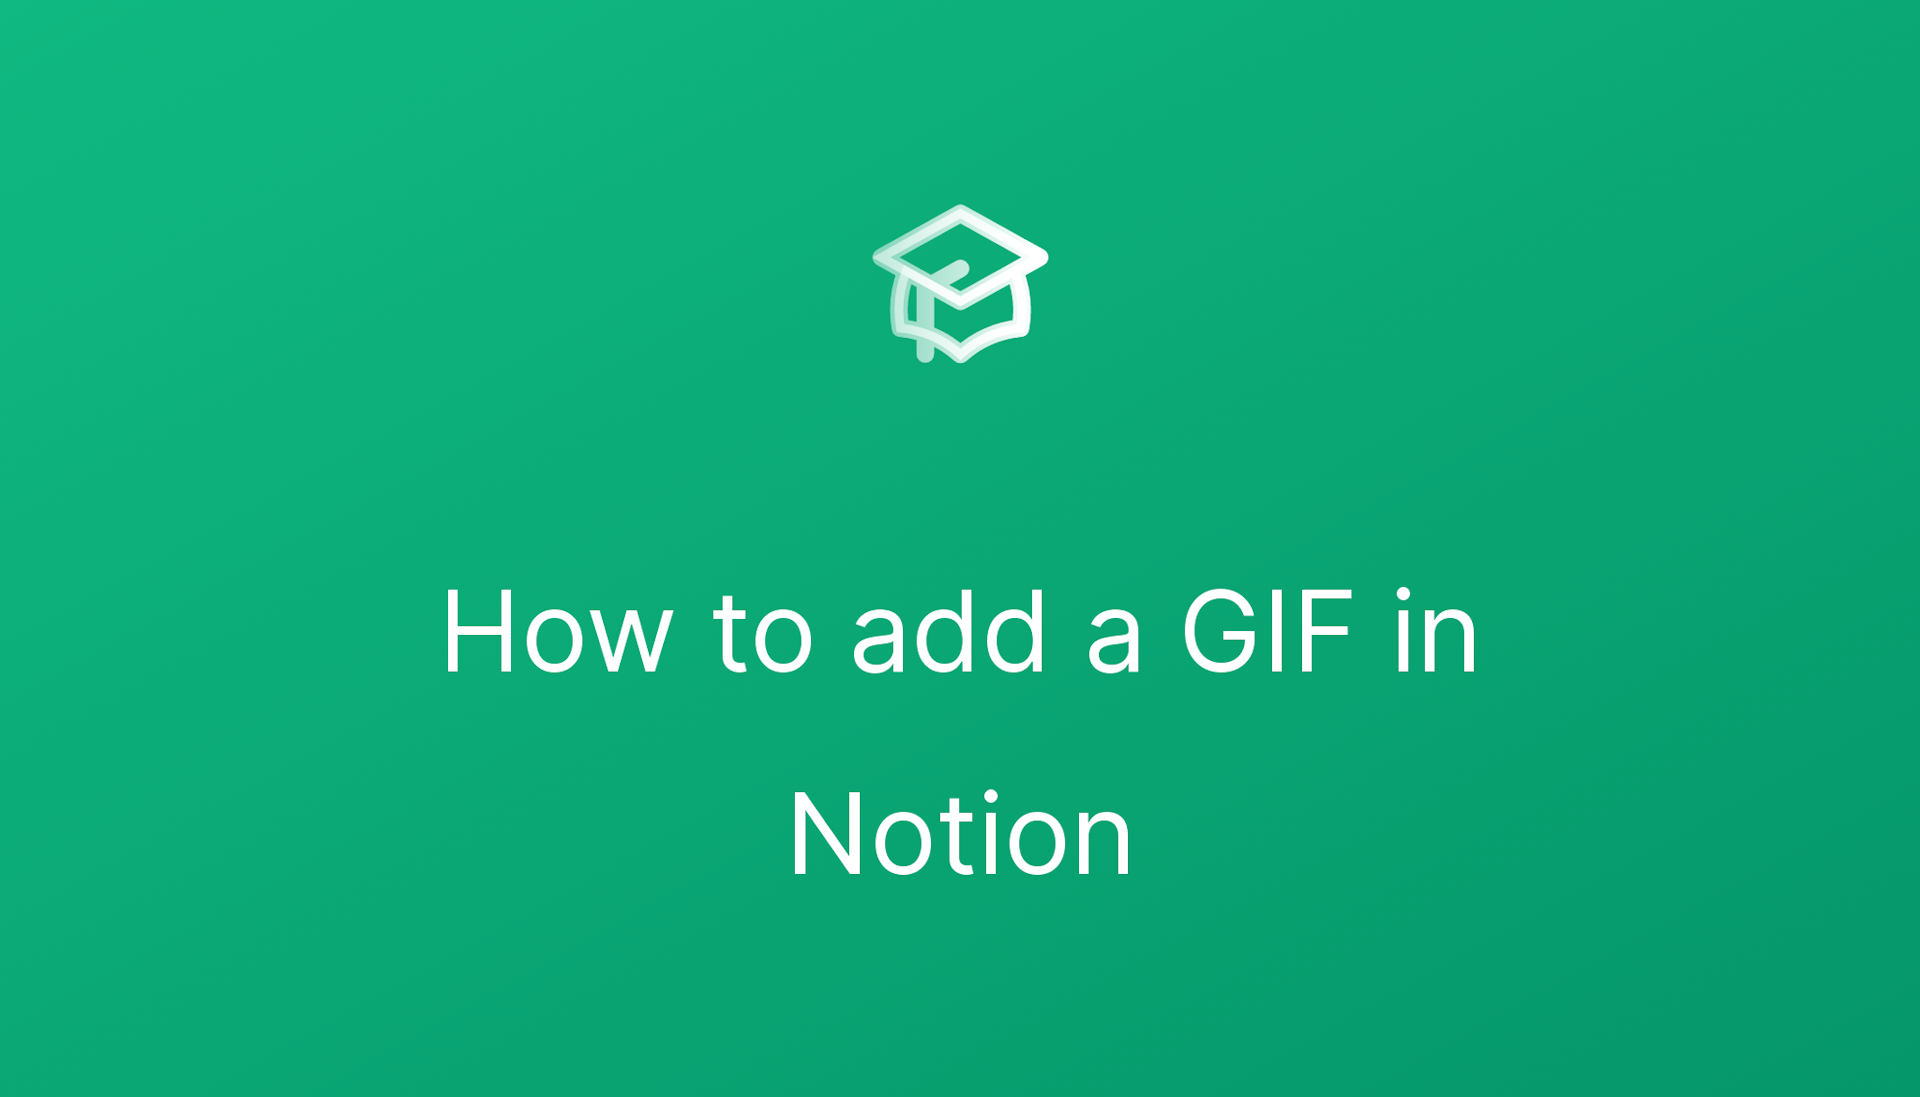 How to add a GIF in Notion